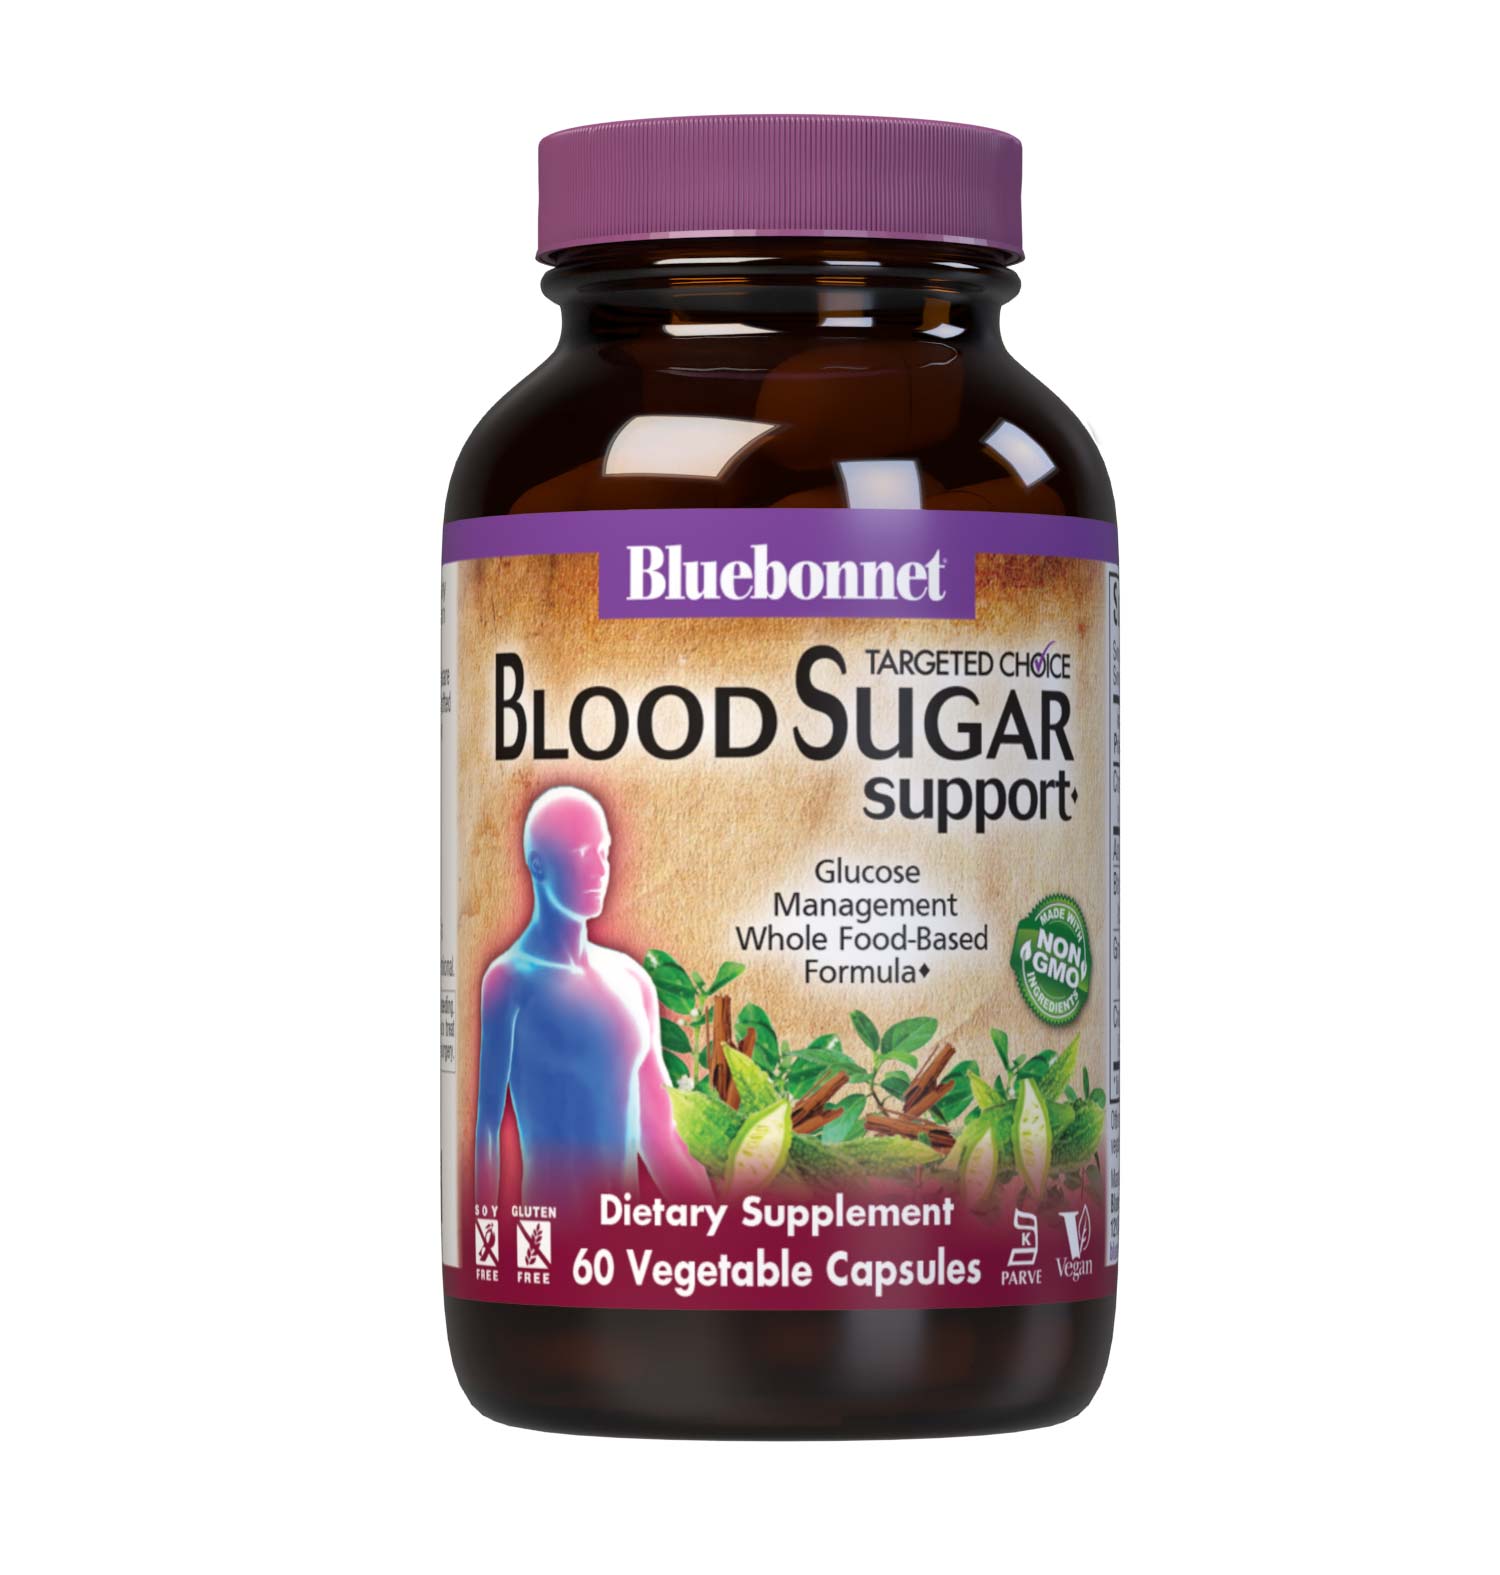 Bluebonnet’s Targeted Choice Blood Sugar Support 60 Vegetable Capsules are specially formulated with a unique blend of sustainably harvested or wildcrafted herbal/botanical extracts, chelated chromium, plus alpha lipoic acid to help maintain healthy blood glucose levels already within the normal range. #size_60 count